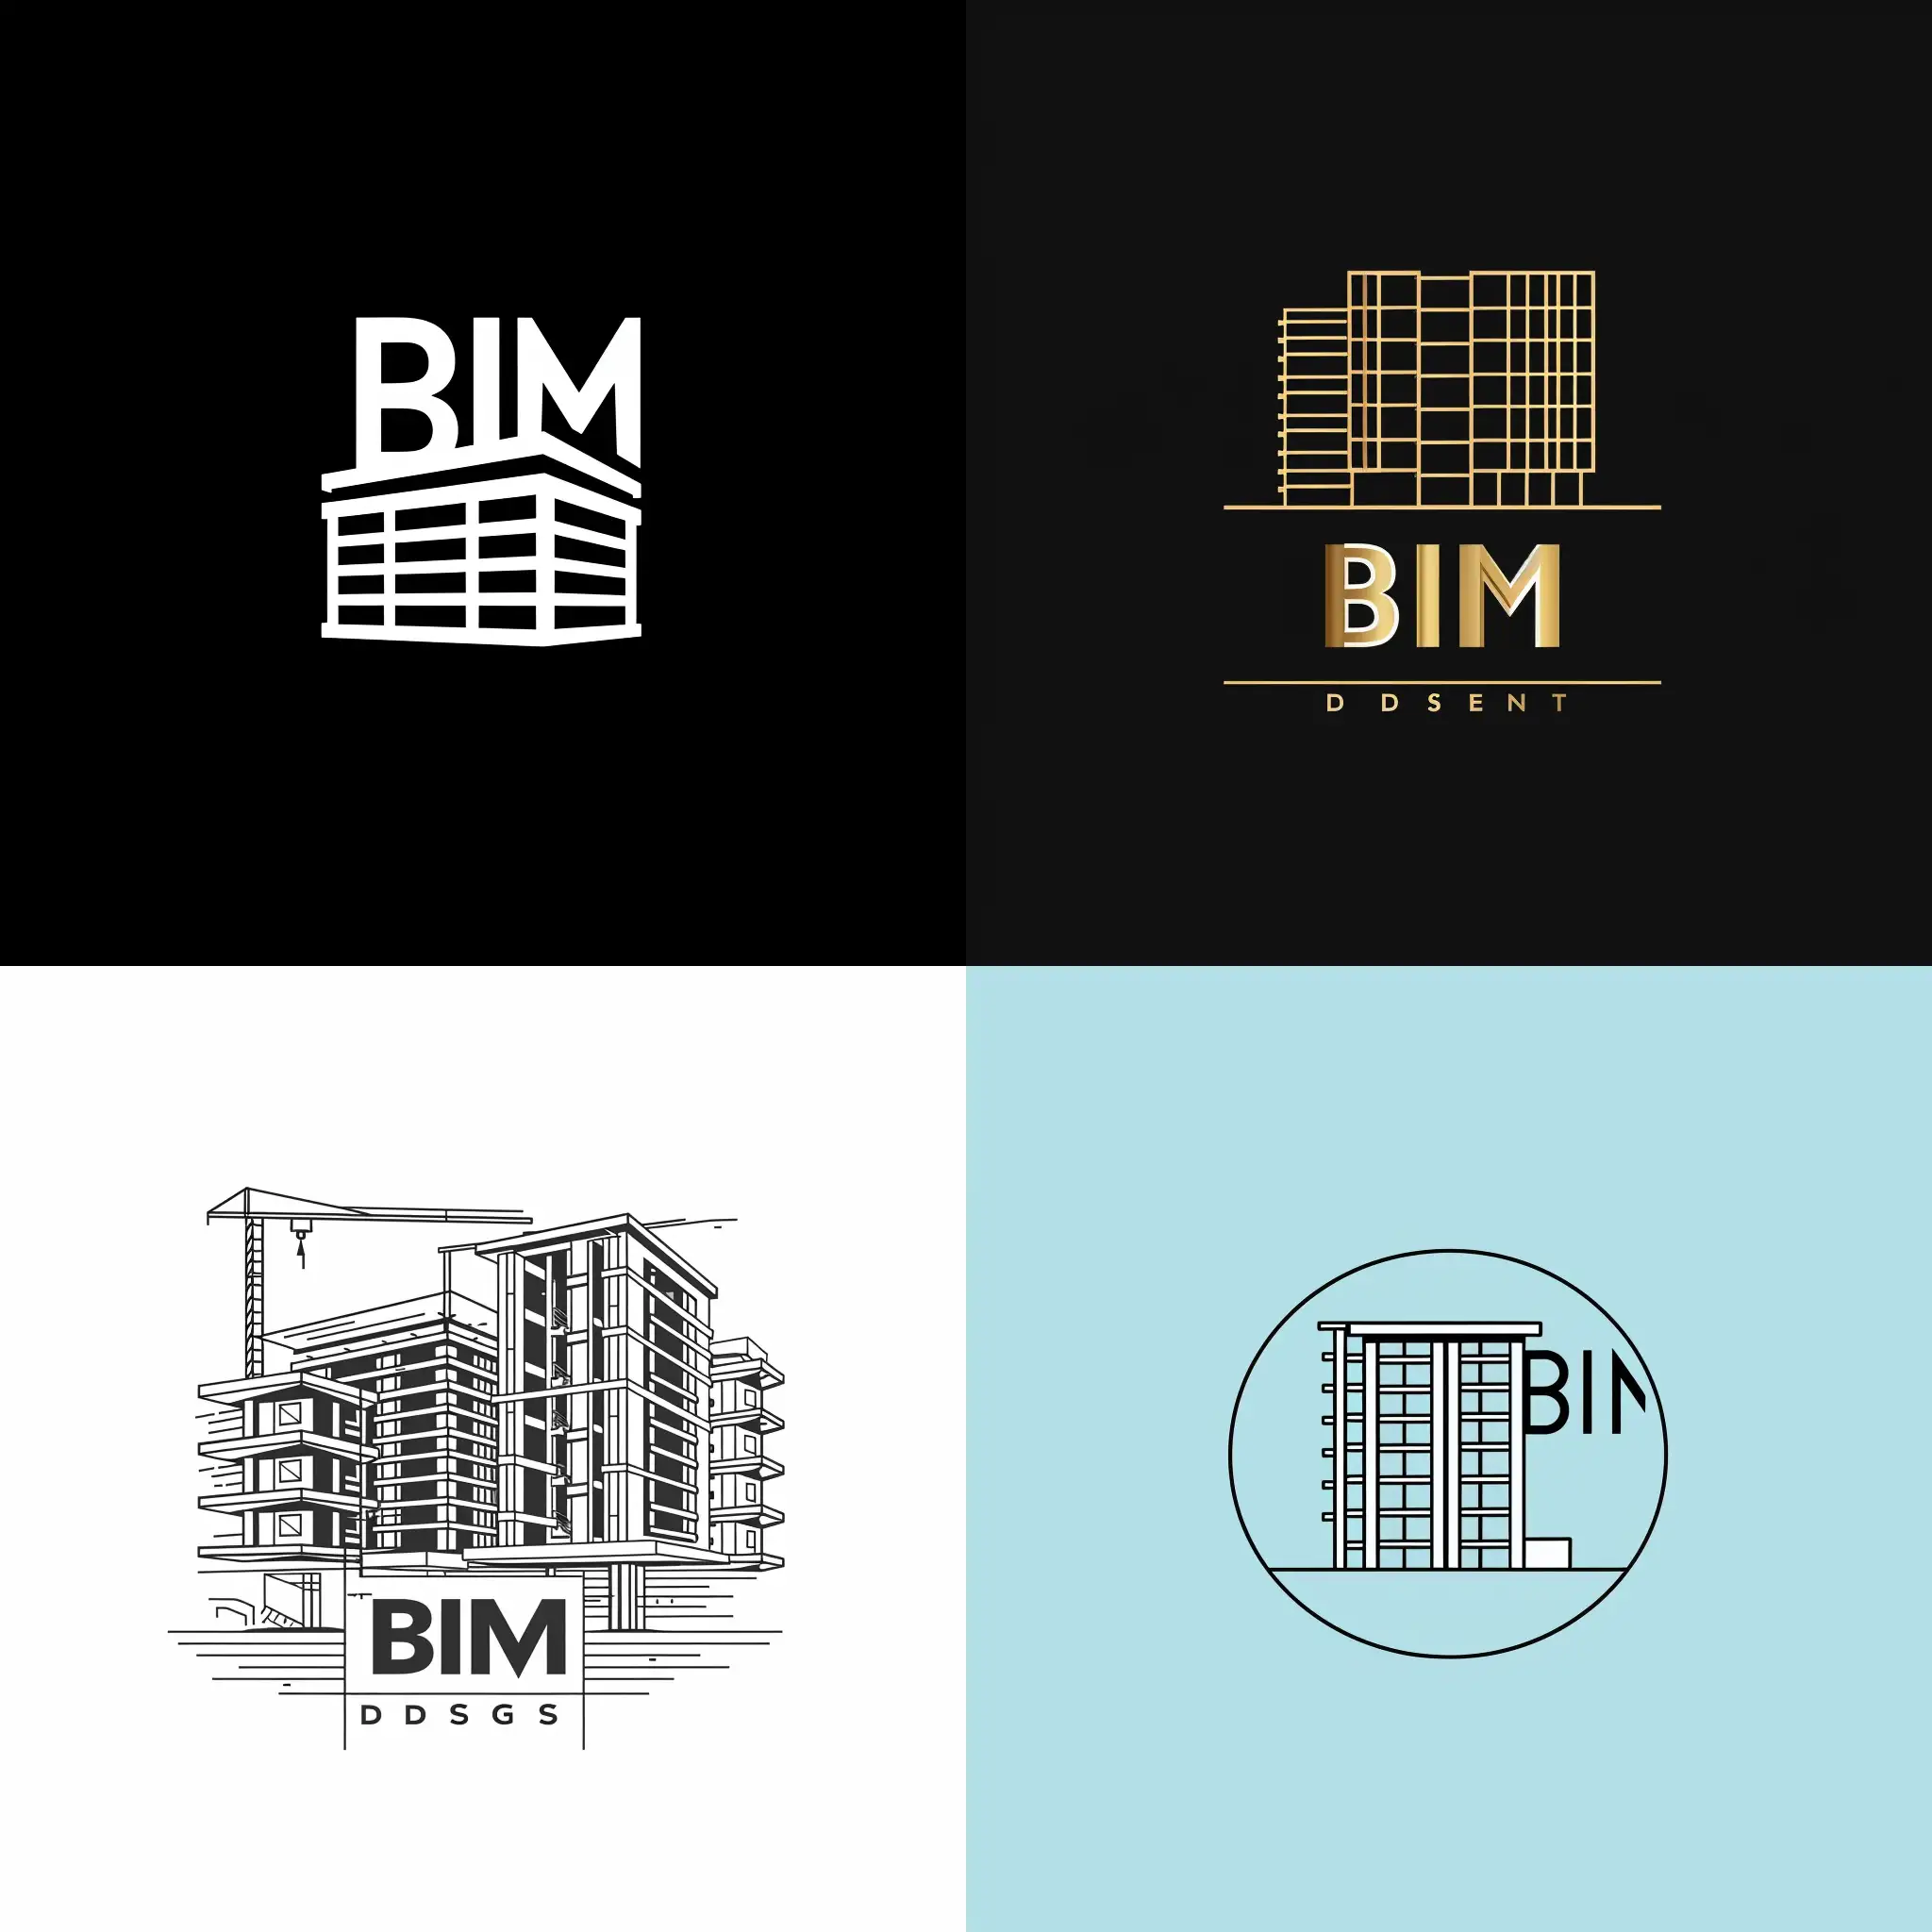 Minimalistic logo, The company is engaged in construction and design, the company is engaged in design using advanced BIM design technology and is related to construction, the logo should have the building and the main letters or the word BIM in its entirety.